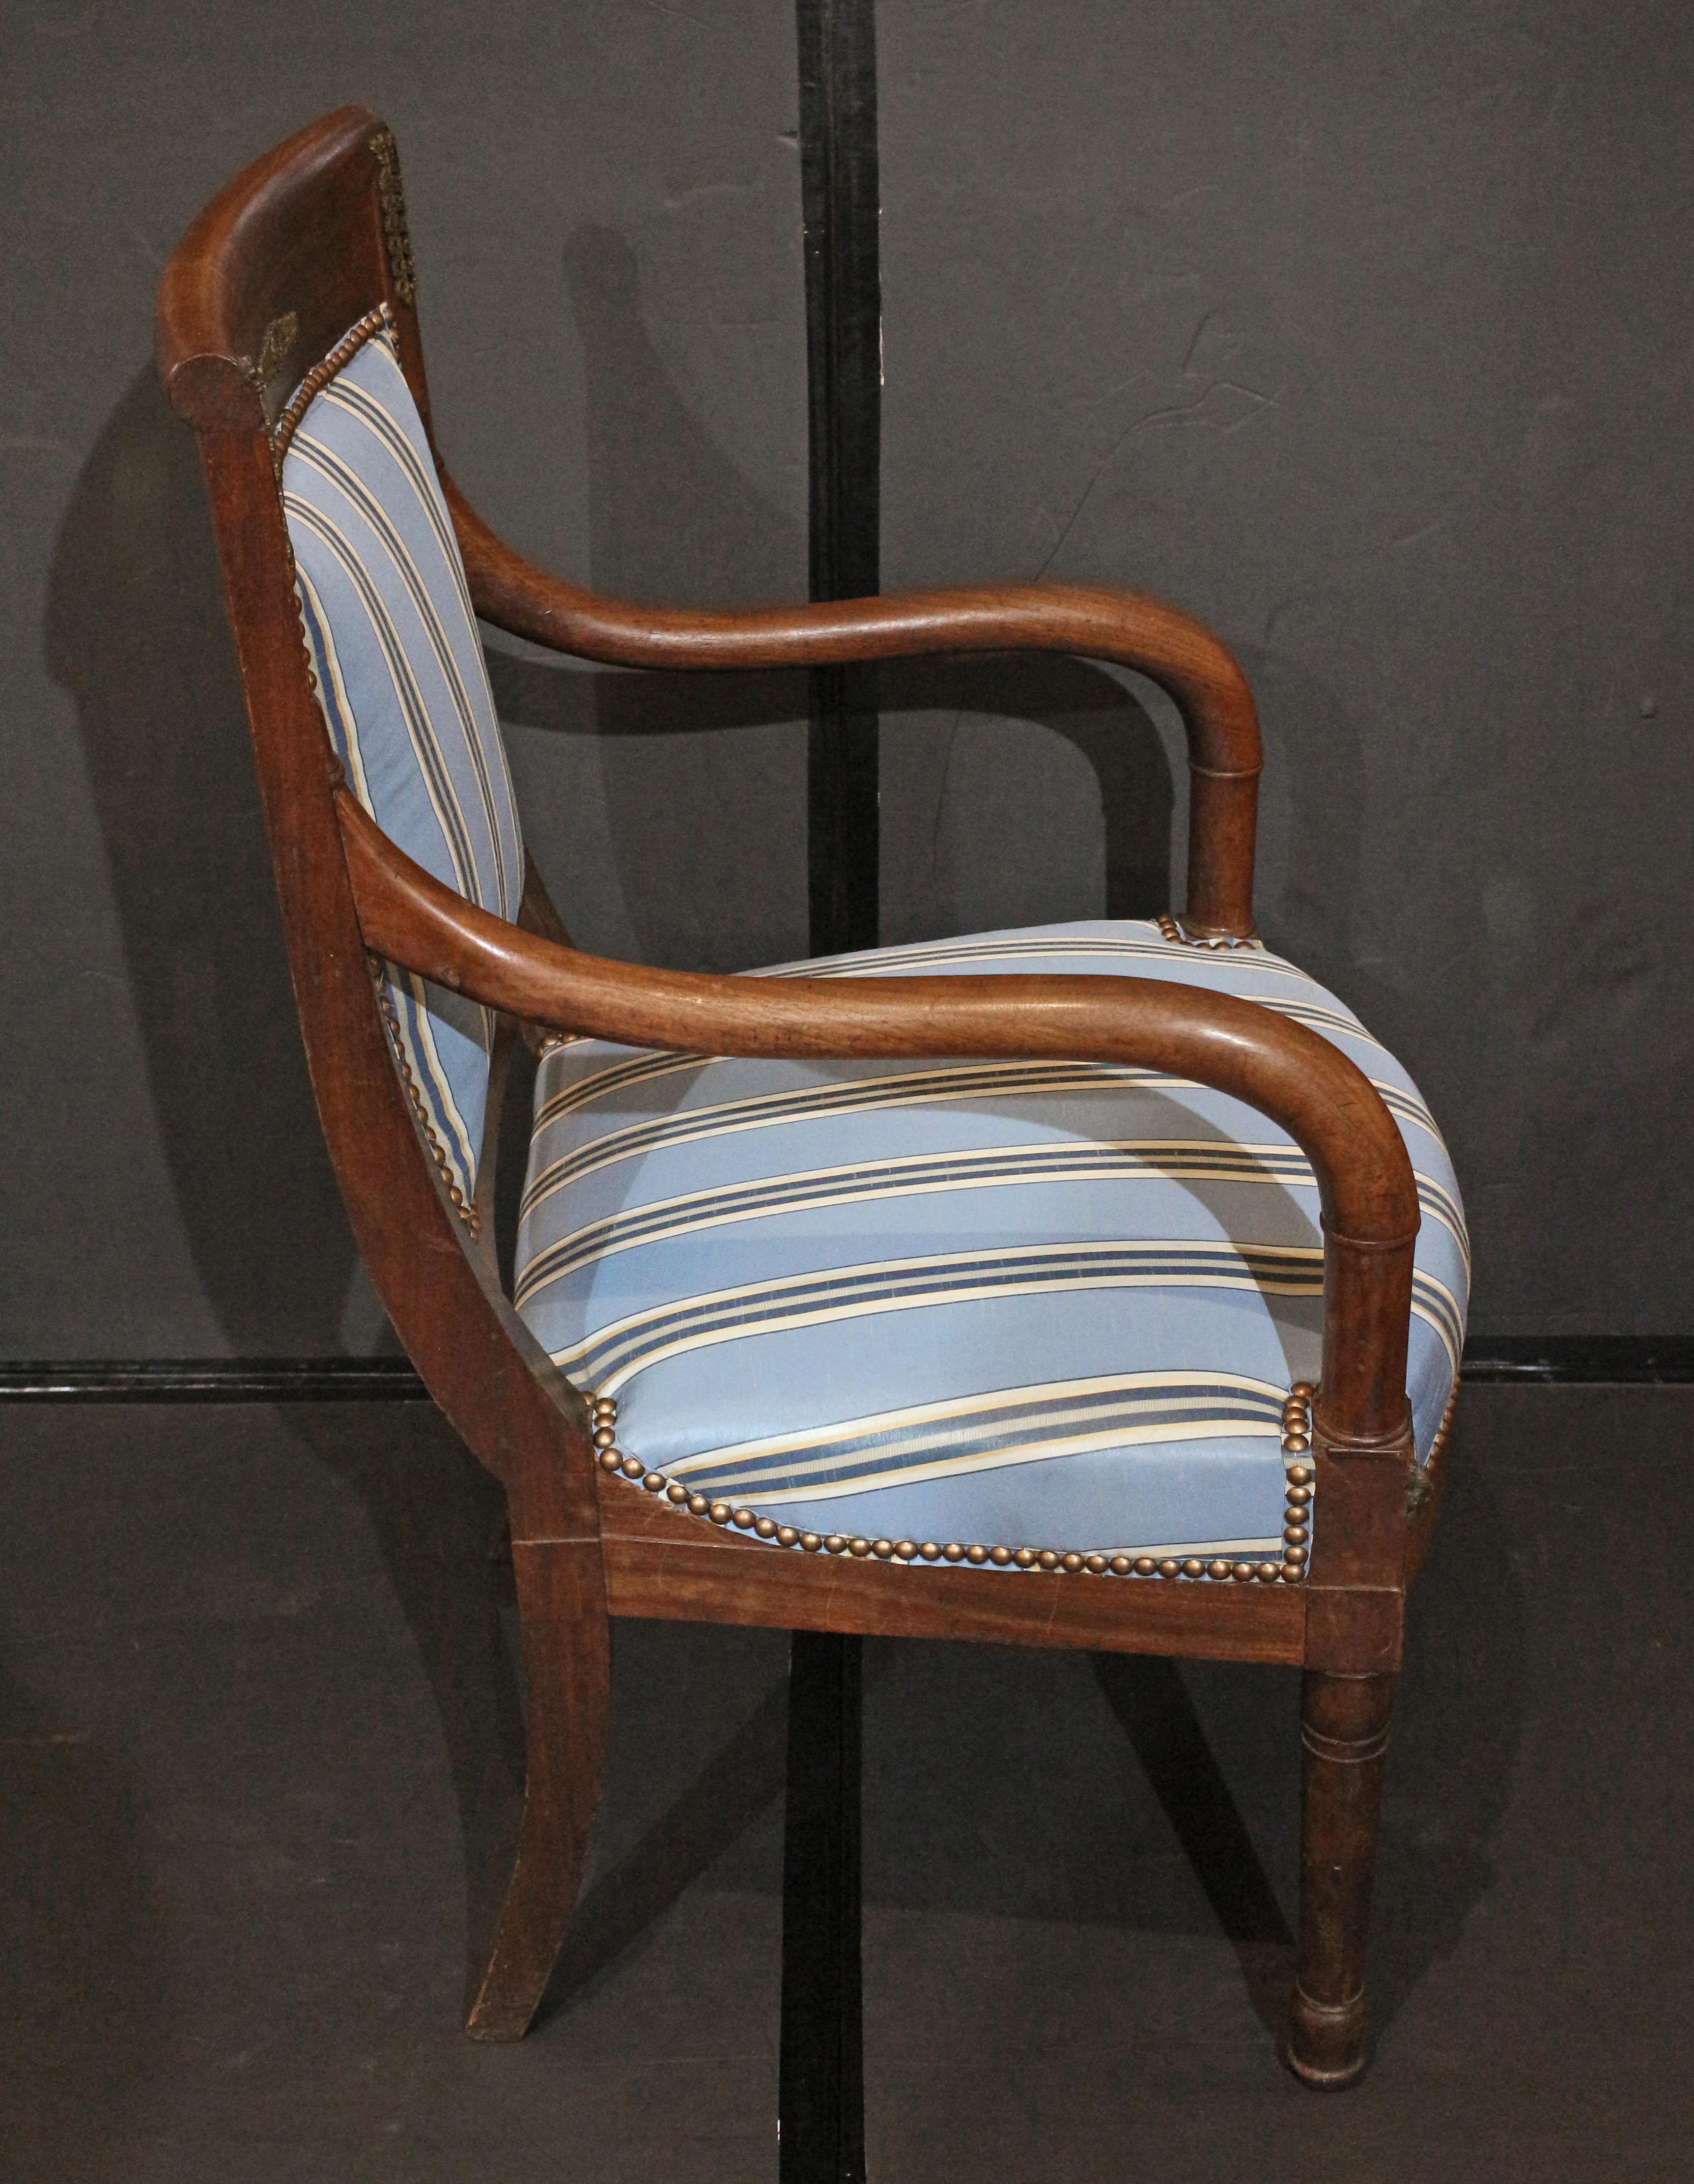 Brass Circa 1800-1815 French Directoire to Empire Period Fauteuil For Sale